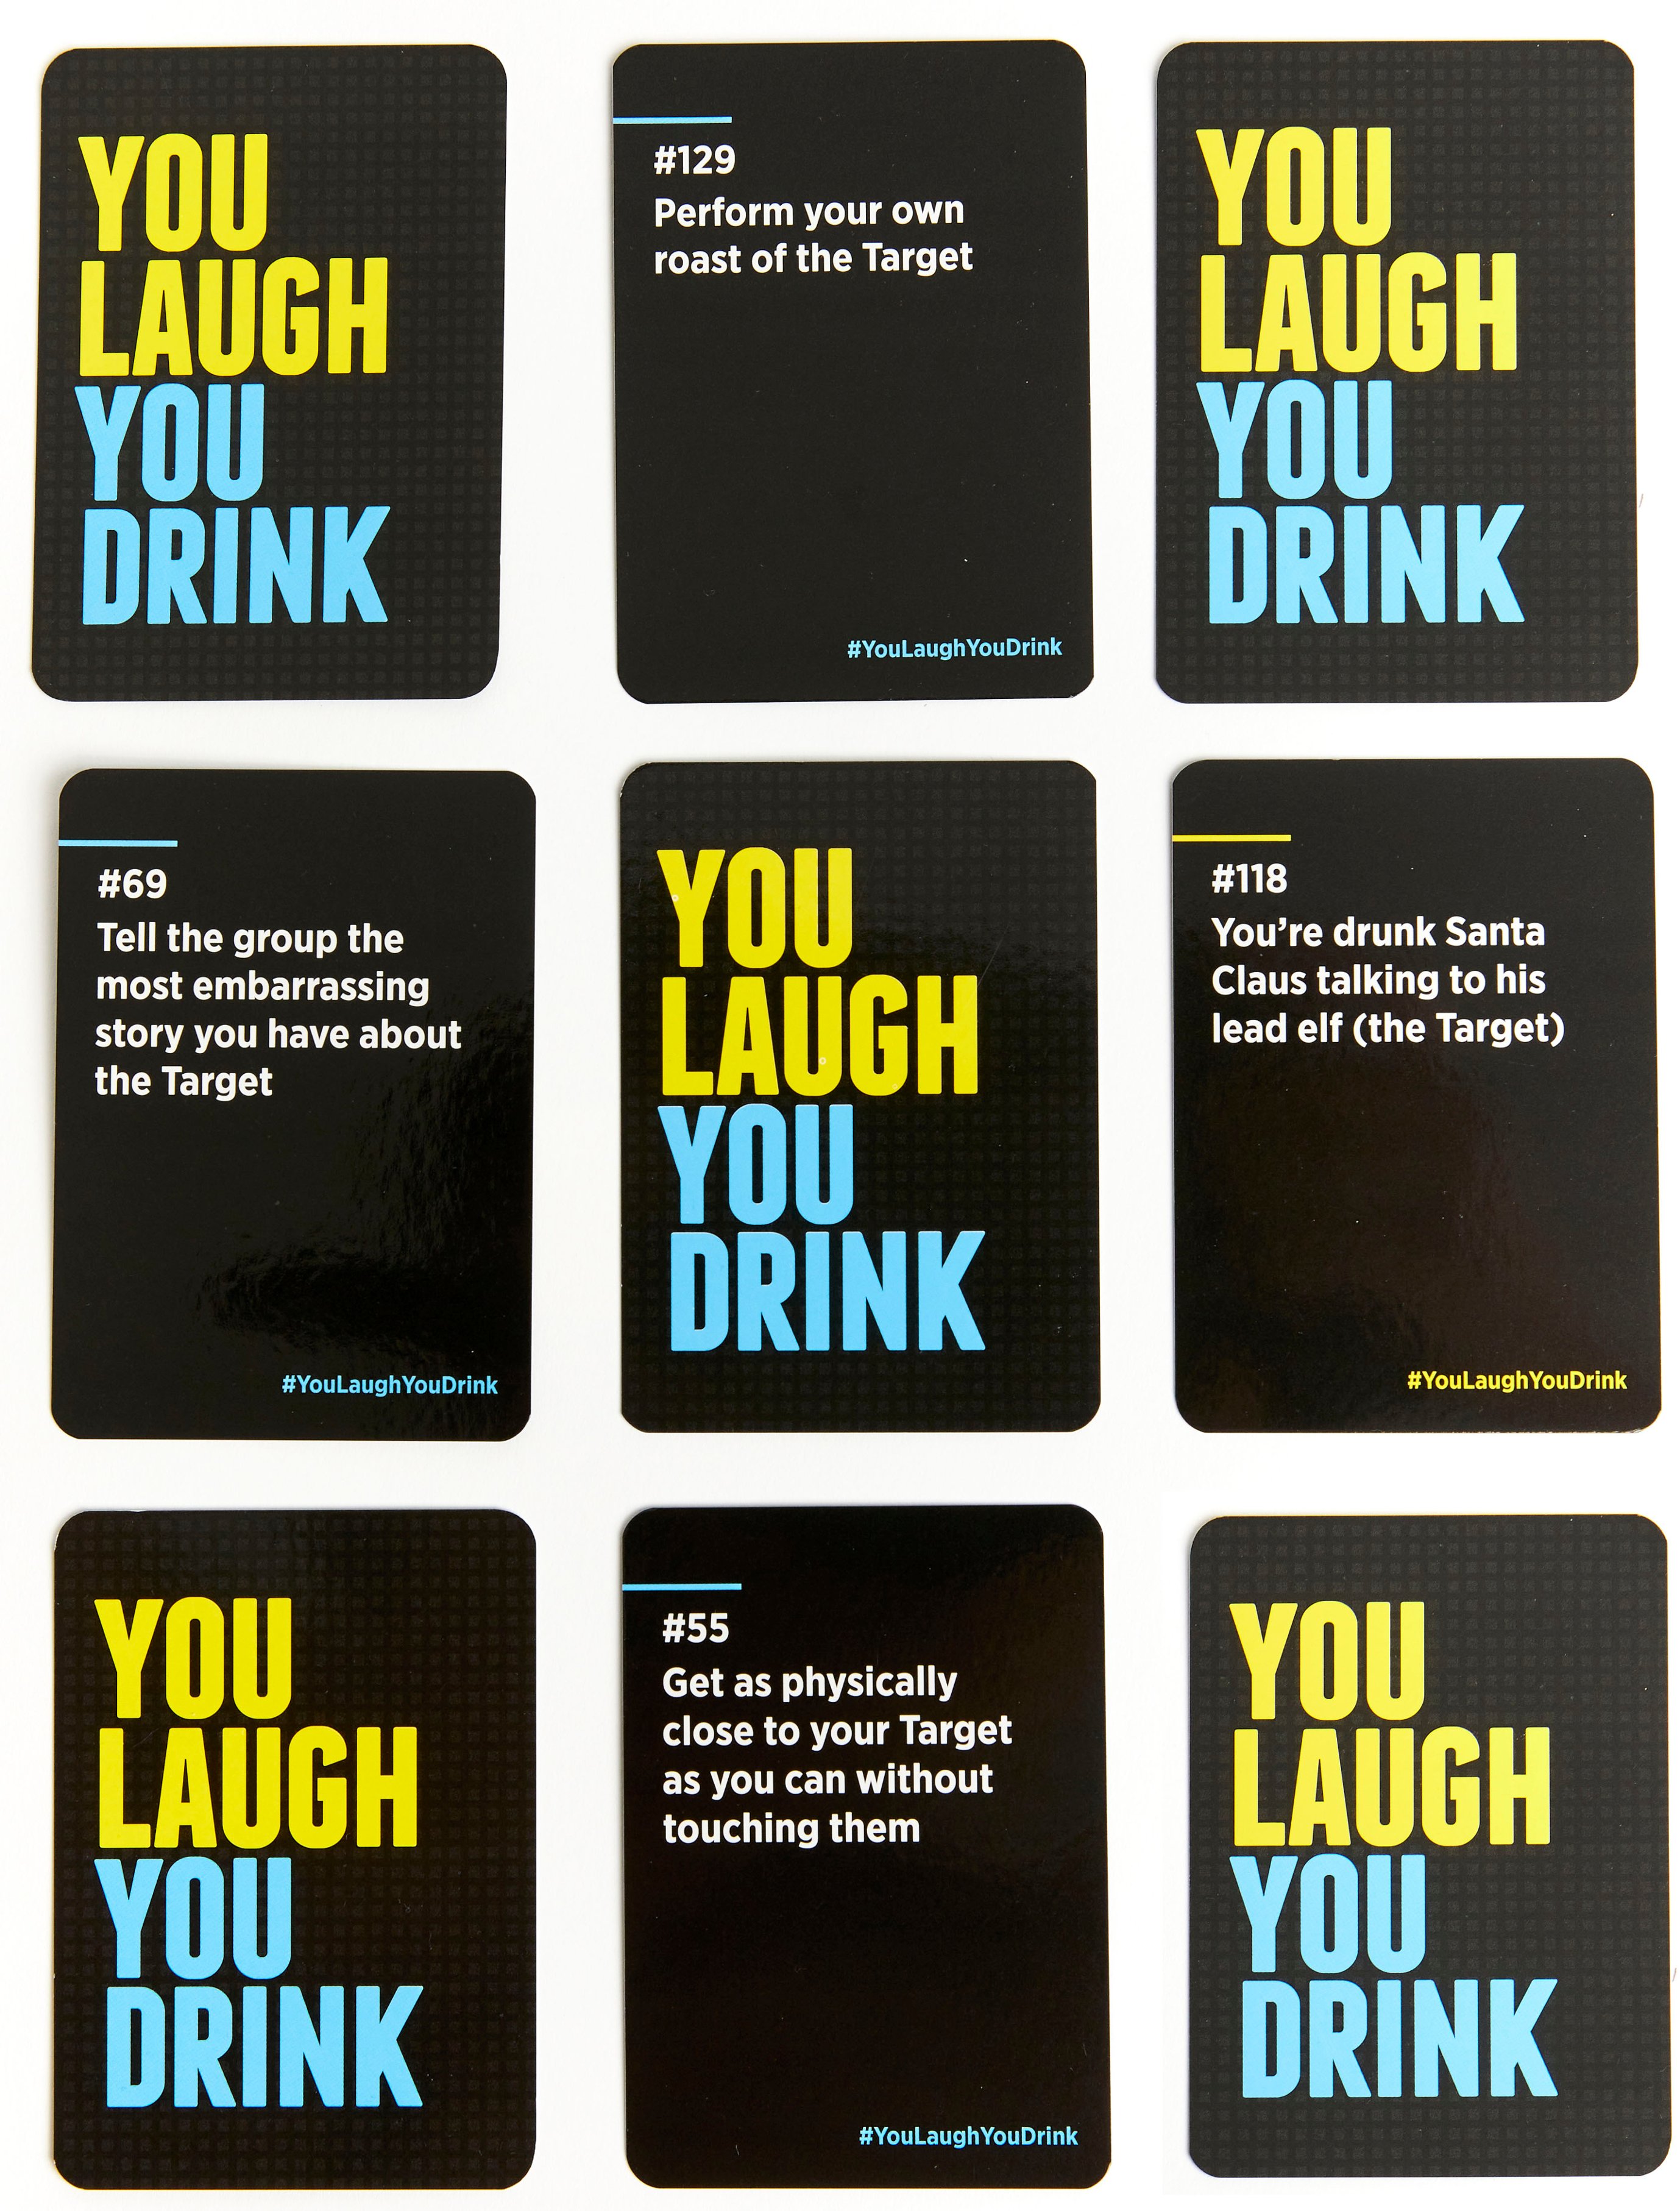 Left View: DSS Games - You Laugh You Drink - Black